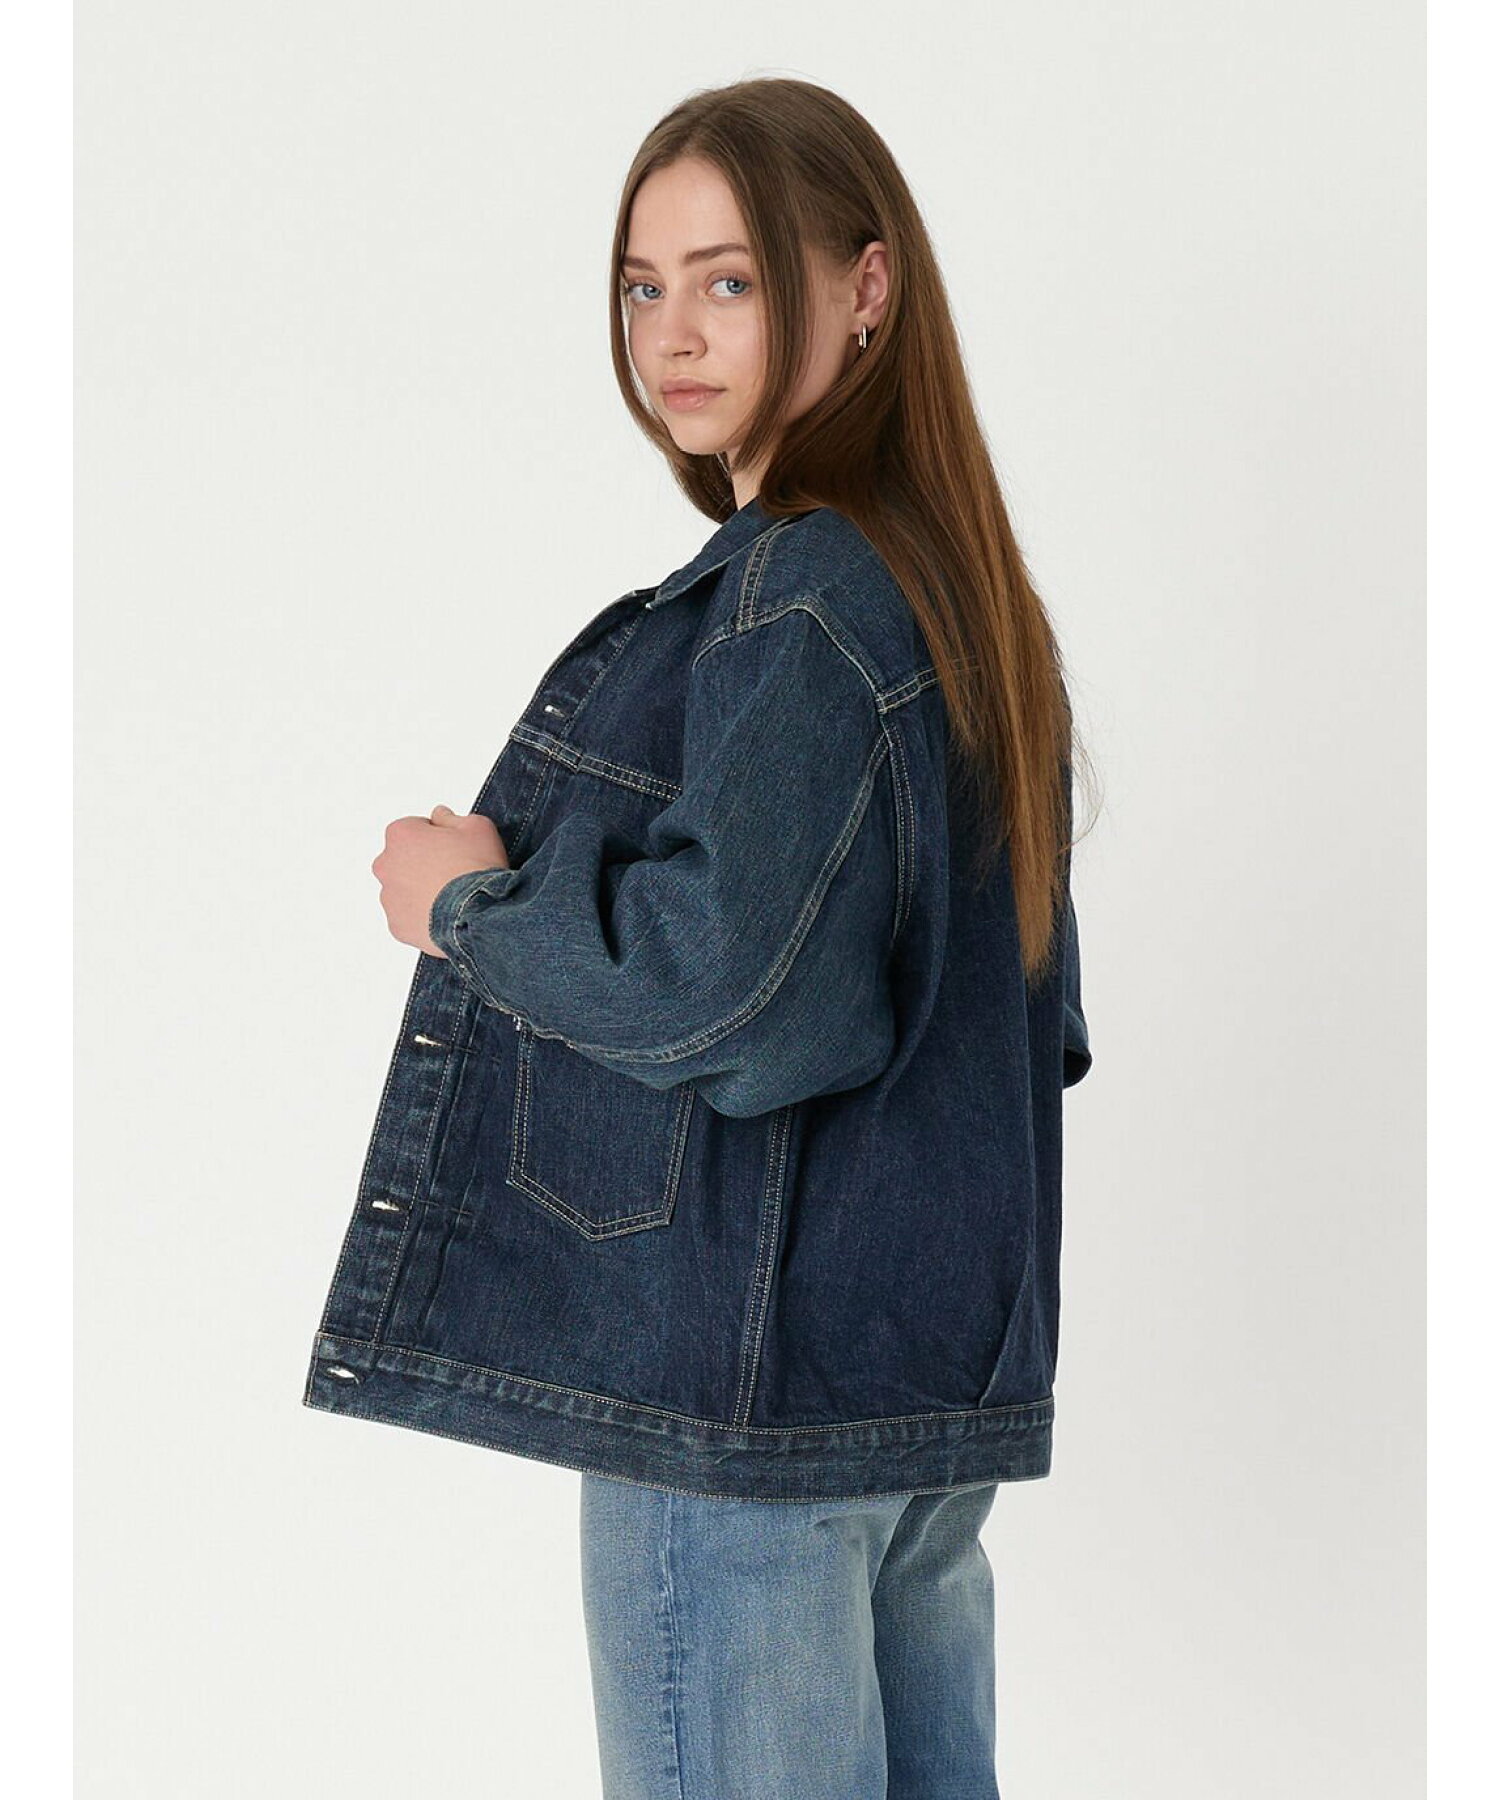 Levi's(R) Made & Crafted(R) Tucked Type II Trucker Jacket